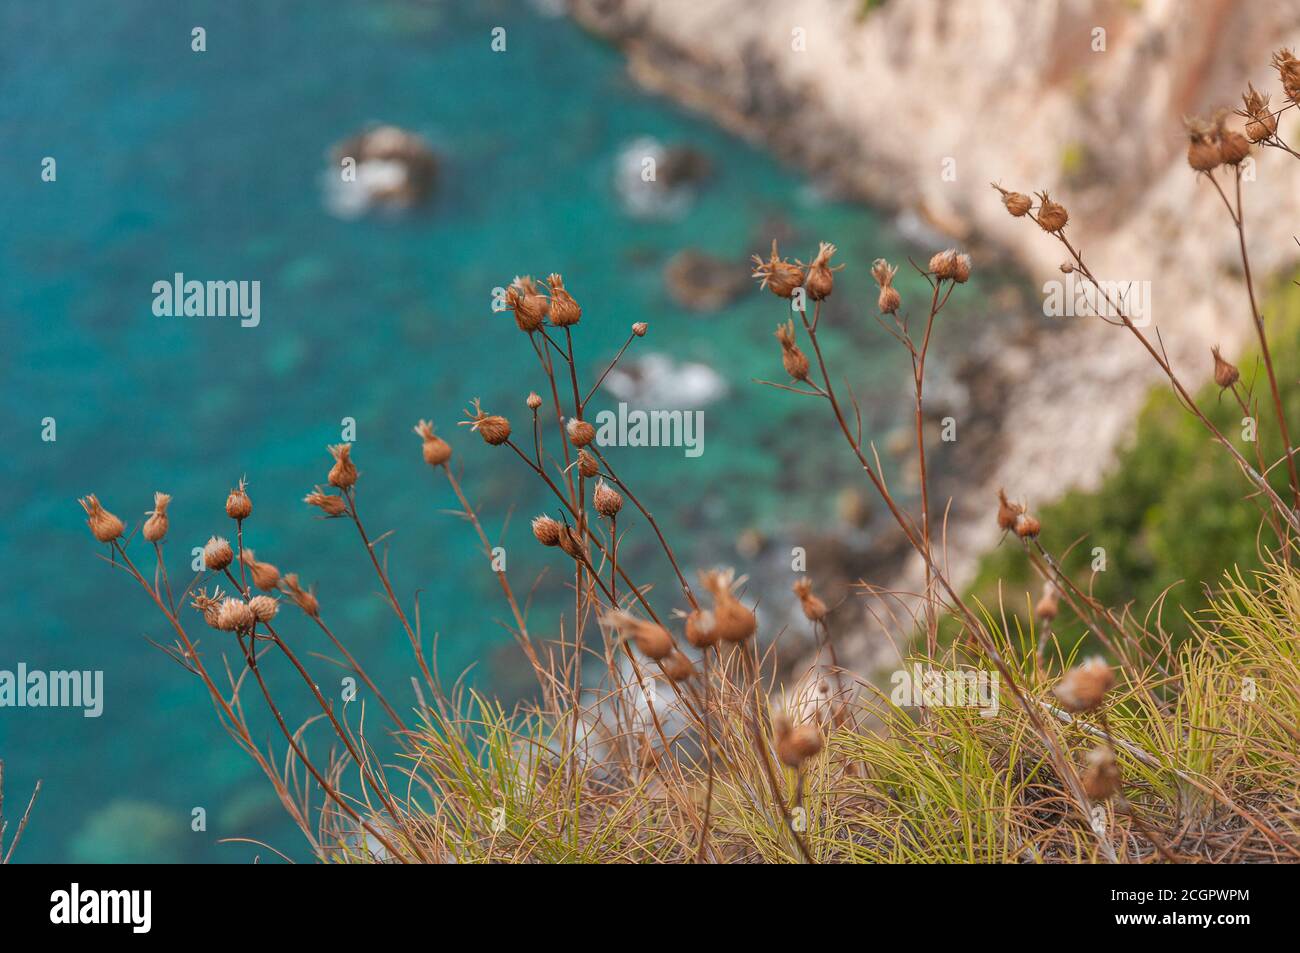 Yellow plants with turquoise sea blurred in the background, Zakynthos island, Greece Stock Photo